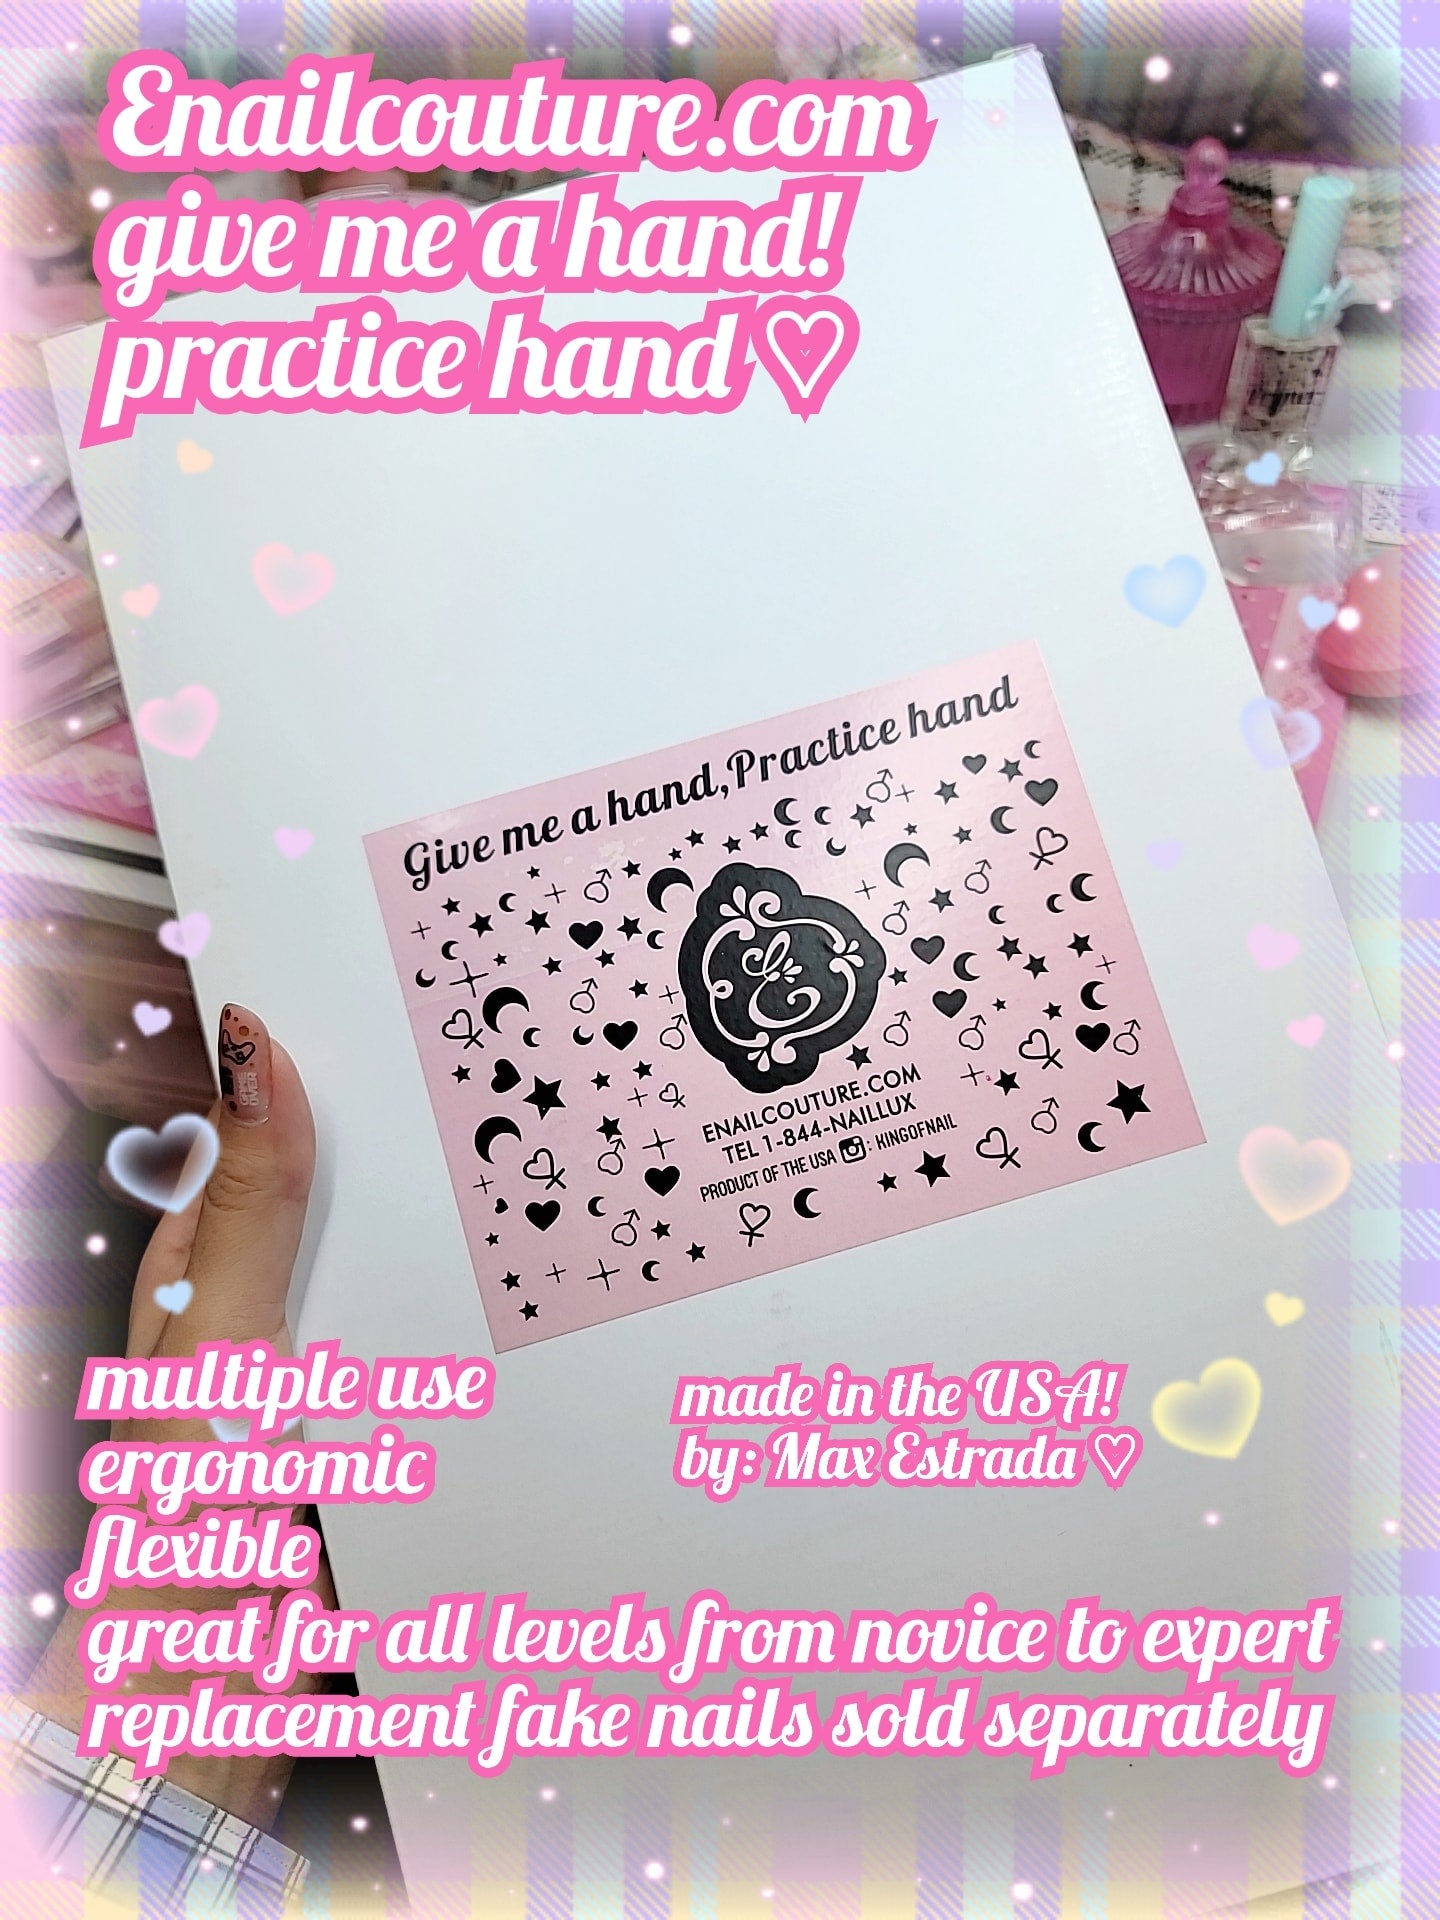 Flexible Practice Hand for Acrylic Nails, Nail Maniquin Hand Training Kit